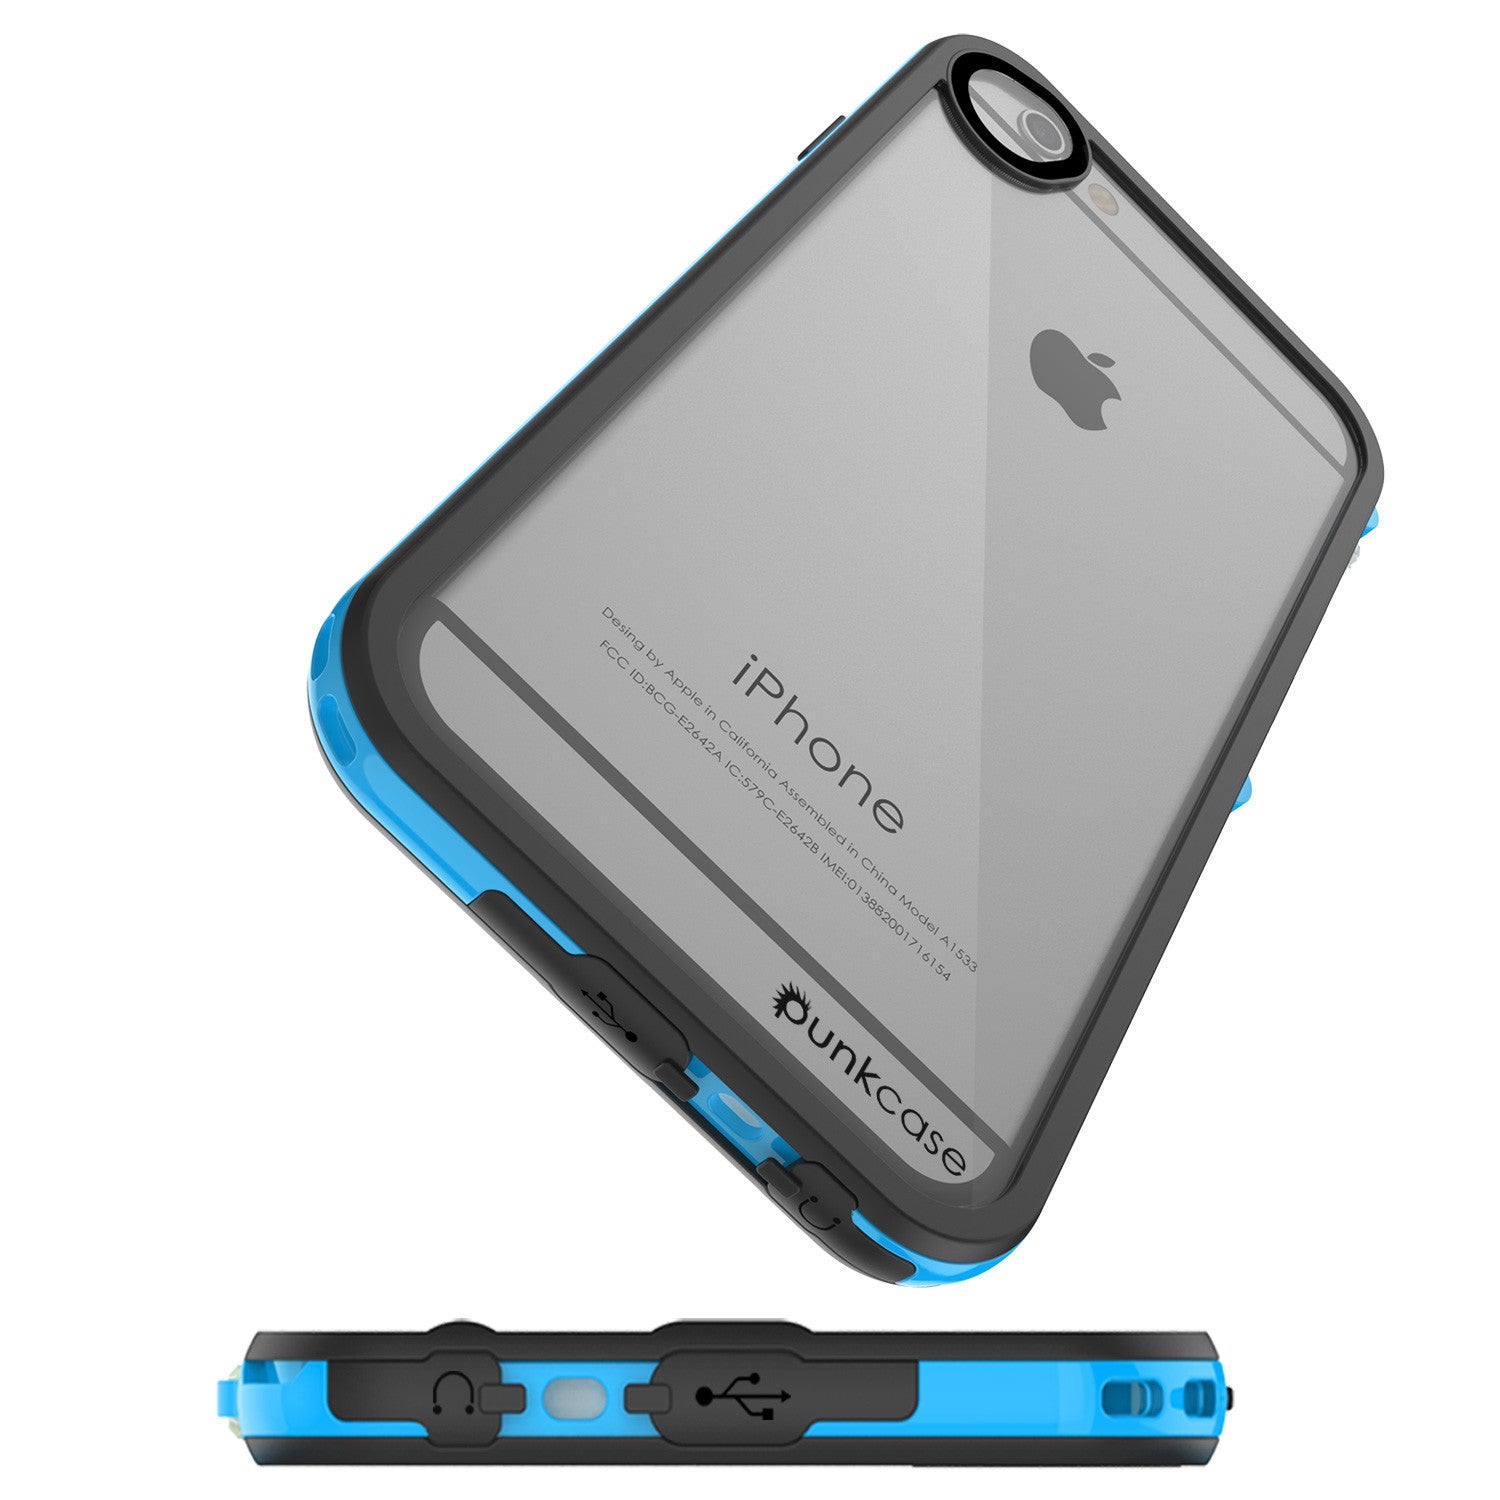 Apple iPhone 7/6s/6 Waterproof Case, PUNKcase CRYSTAL 2.0 Light Blue W/ Attached Screen Protector | Warranty